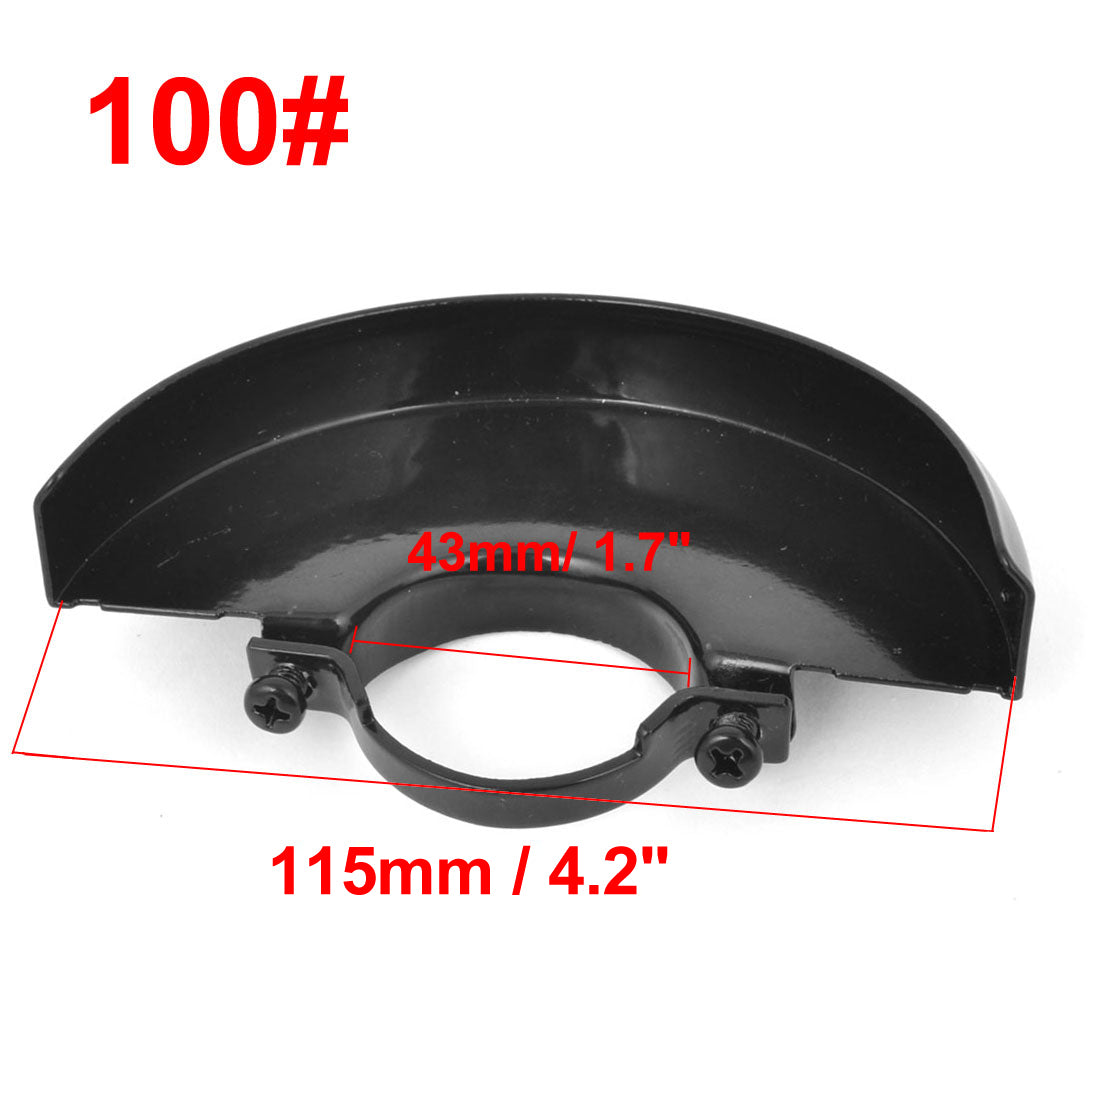 uxcell Uxcell Black Metal Wheel Guard Protector Cover 4.3cm Inner Ring Diameter for 100 type Angle Grinder